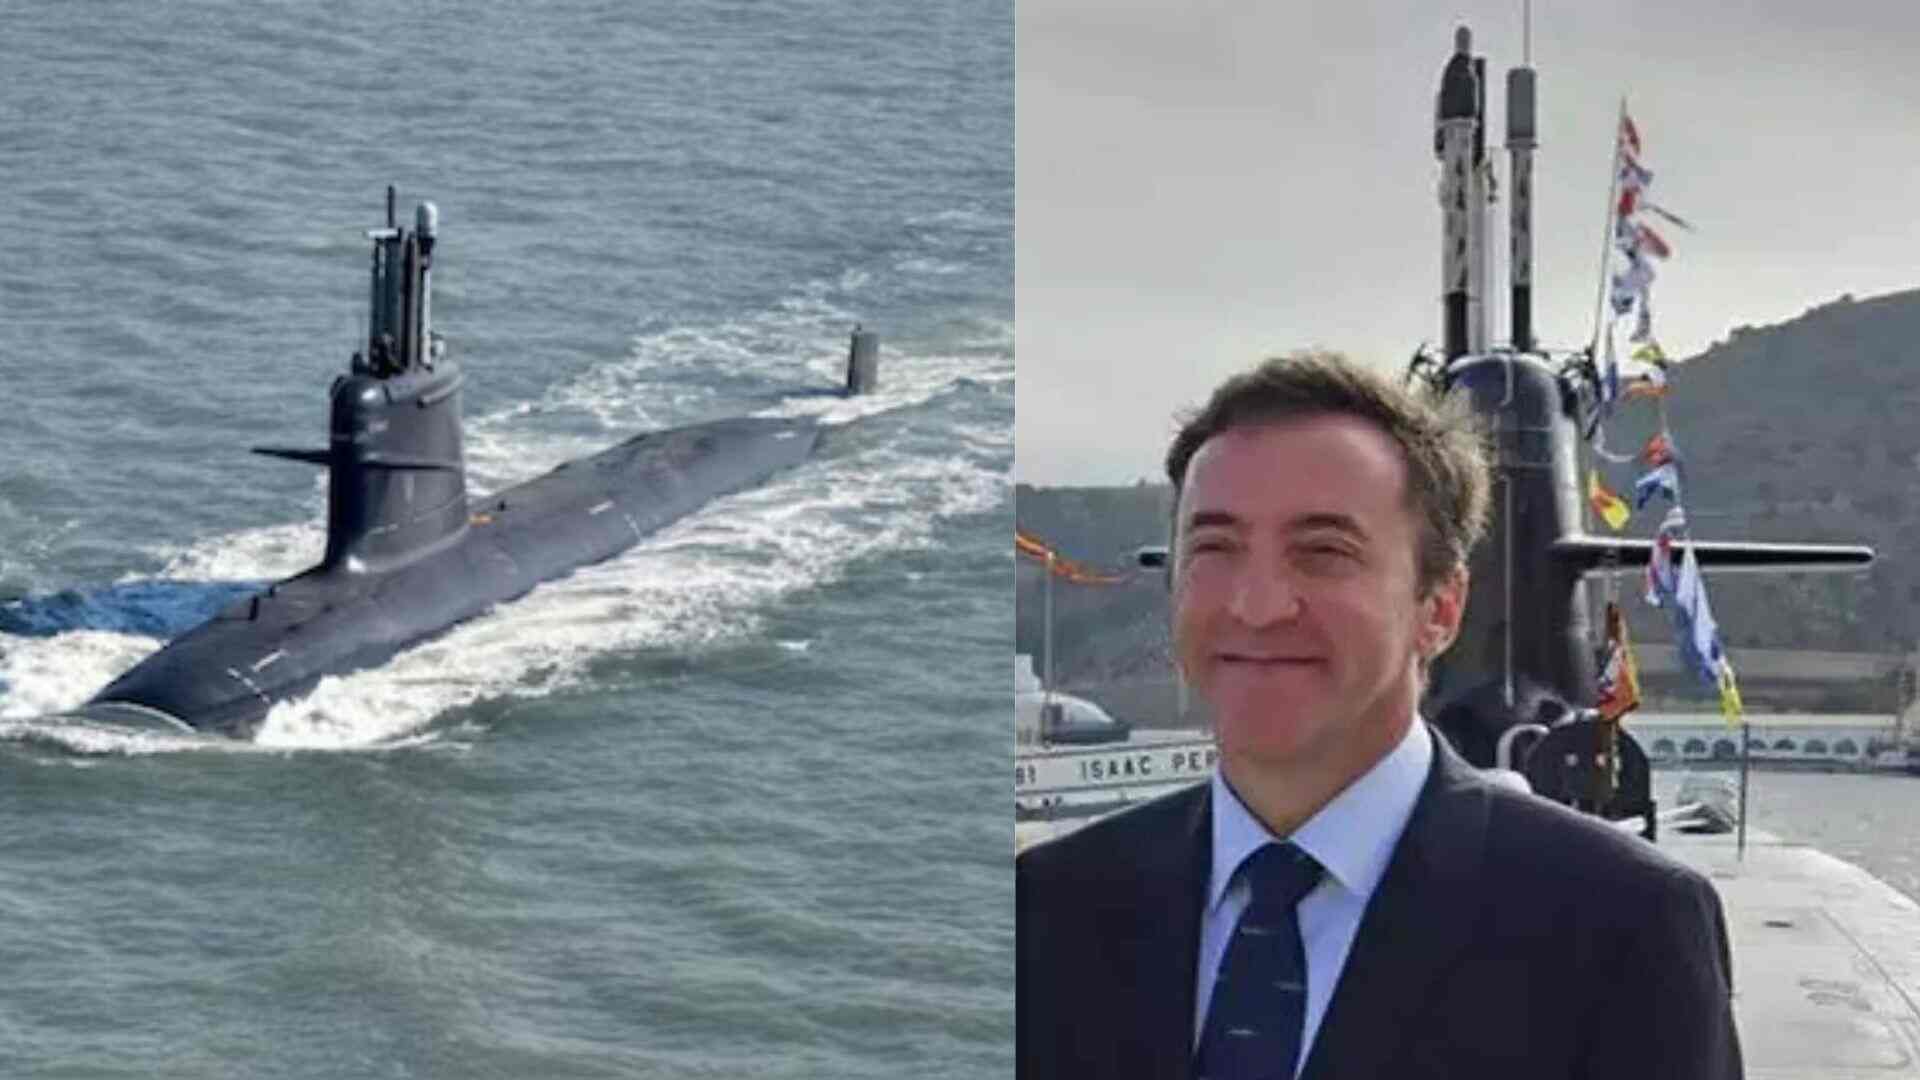 India To Conduct Tests For P-75 India Submarine Project In Spain